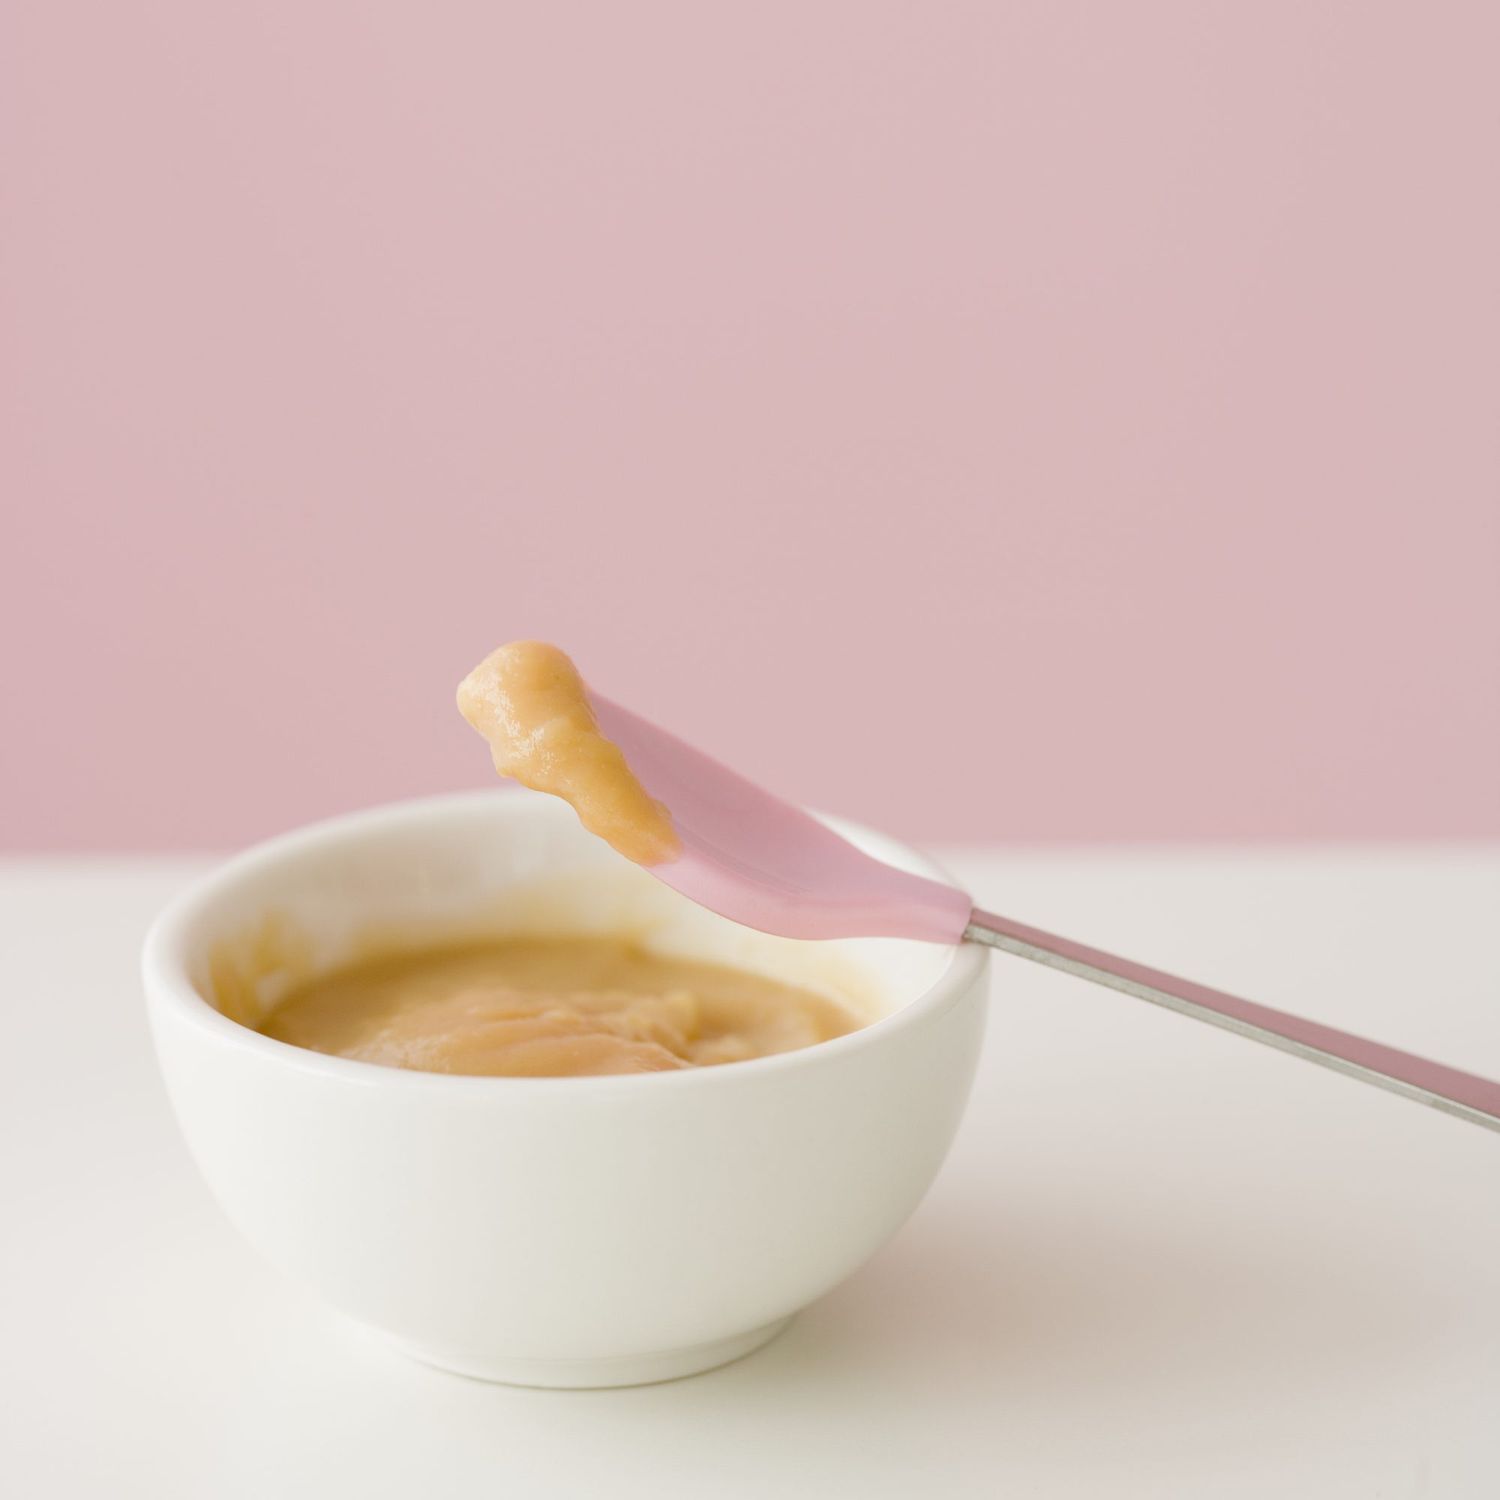 An image of a close up of baby food and spoon.